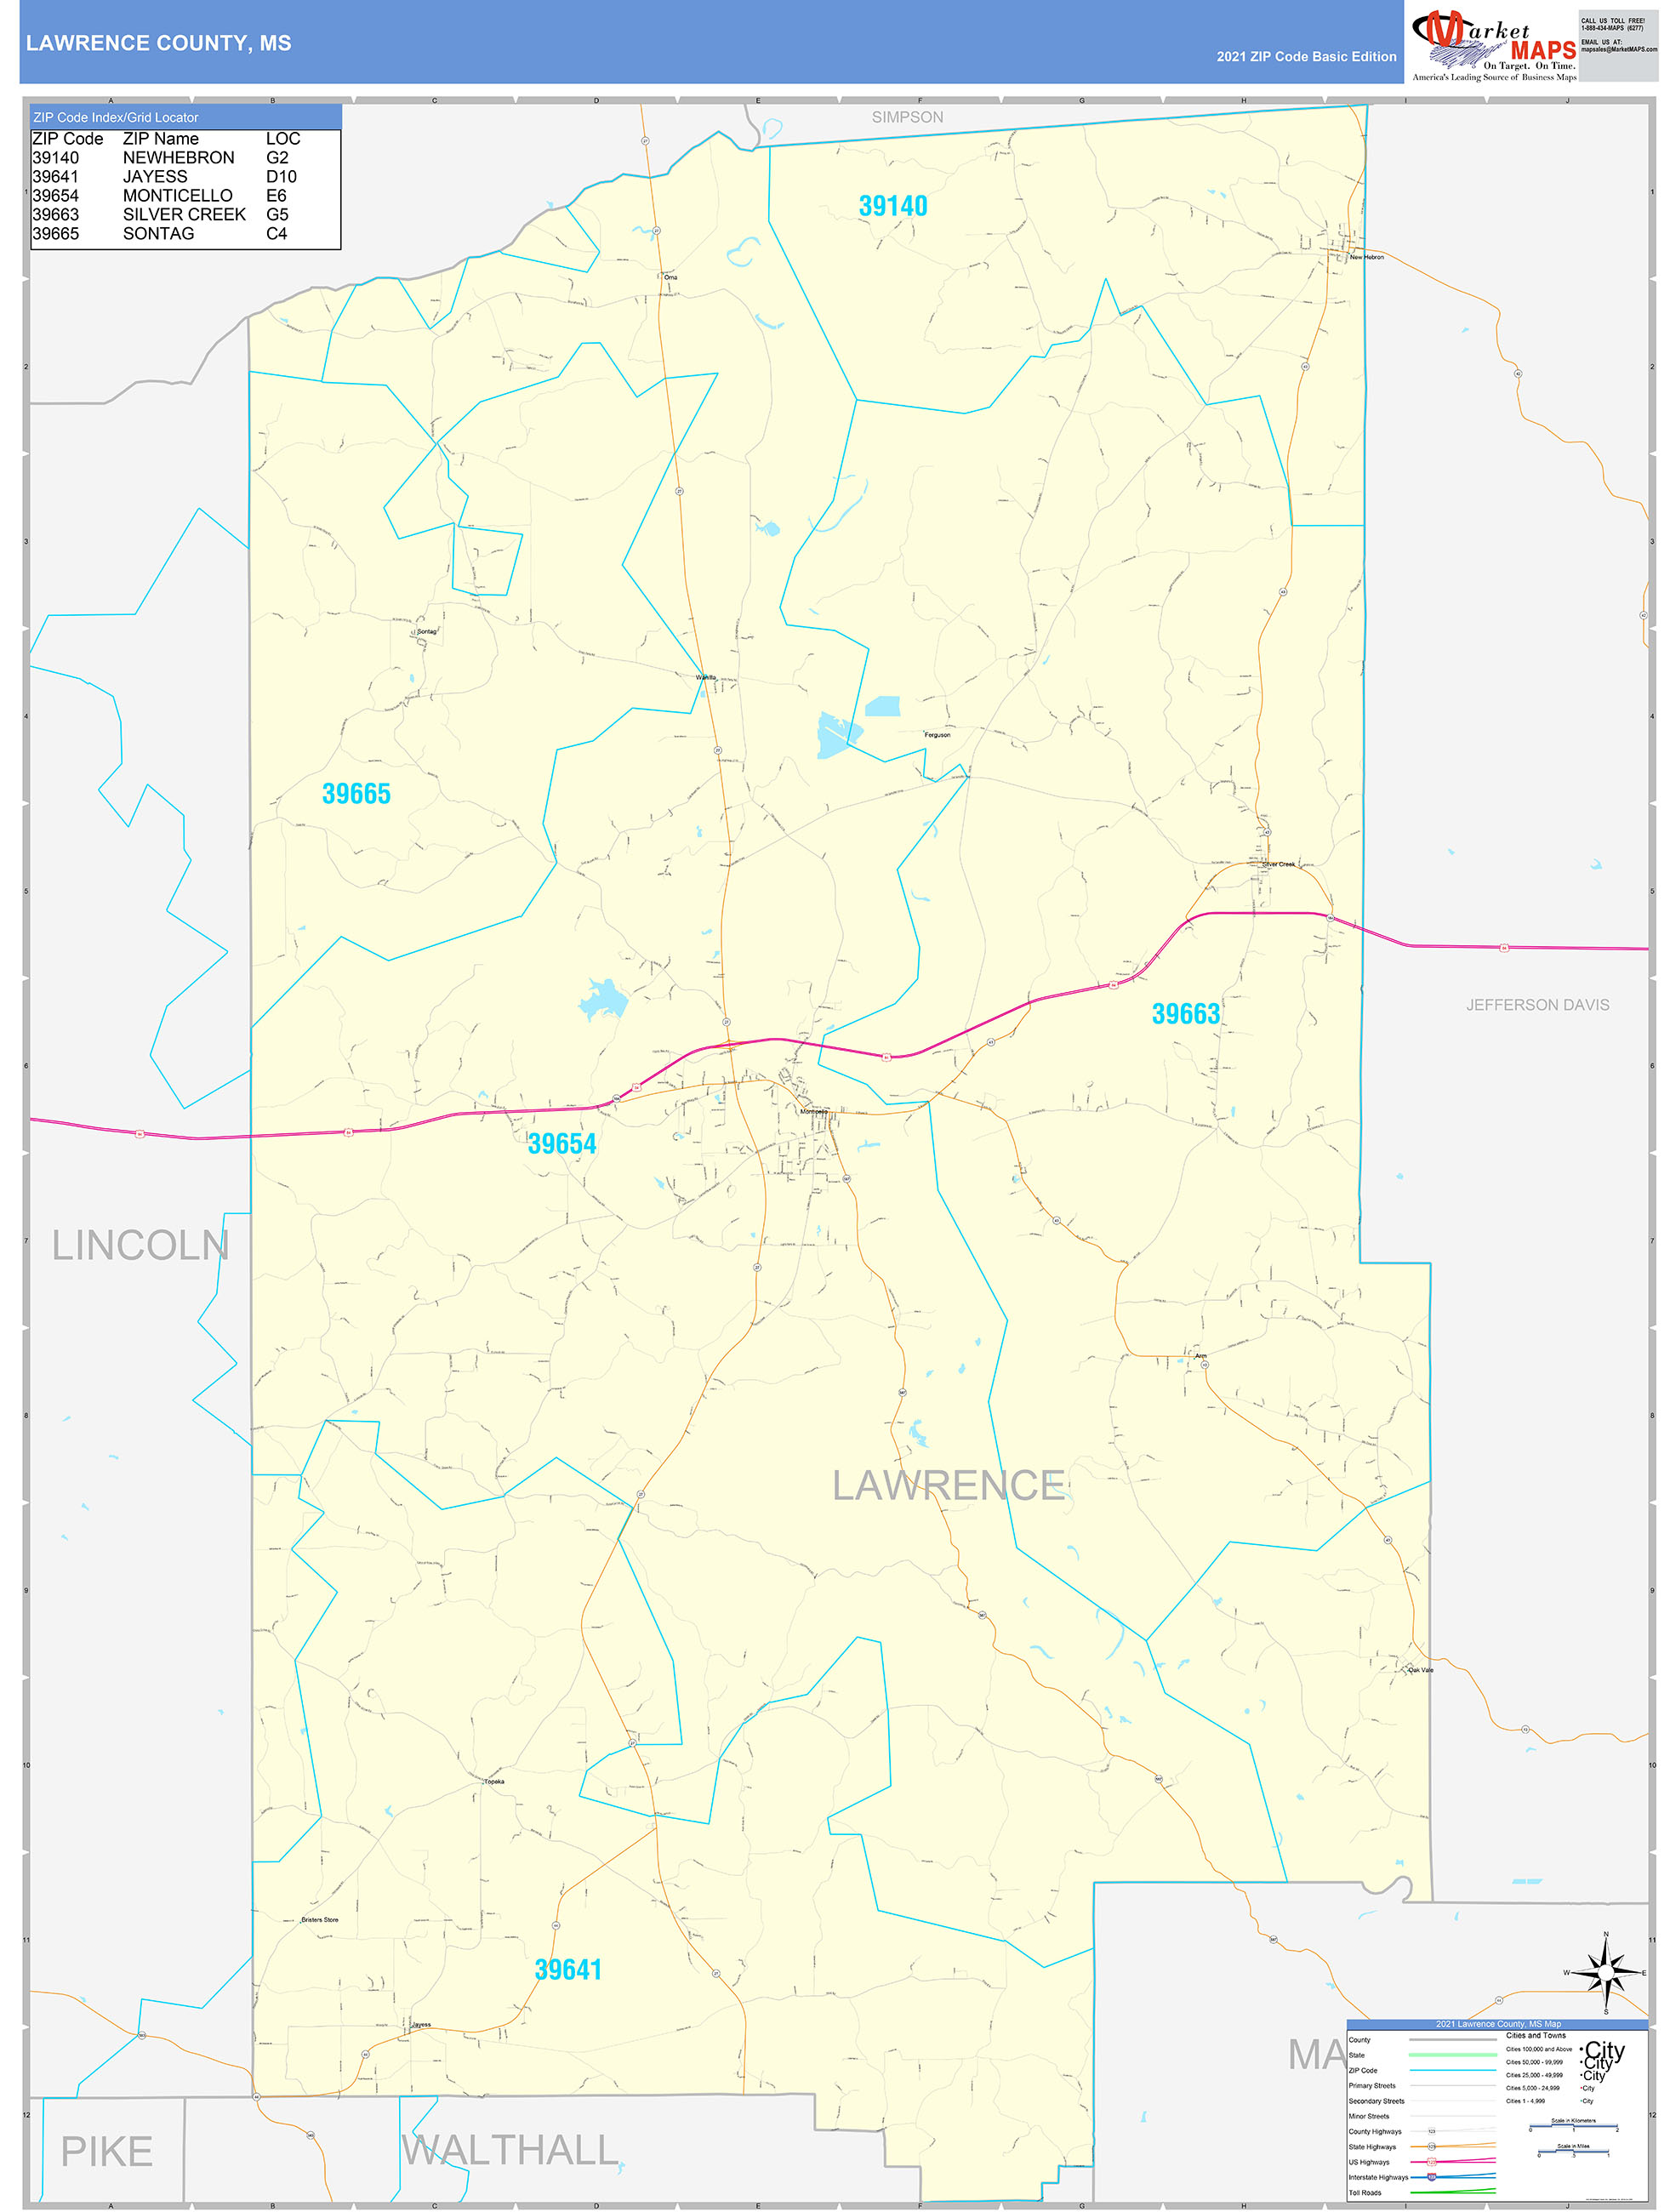 Lawrence County MS Zip Code Wall Map Basic Style by MarketMAPS